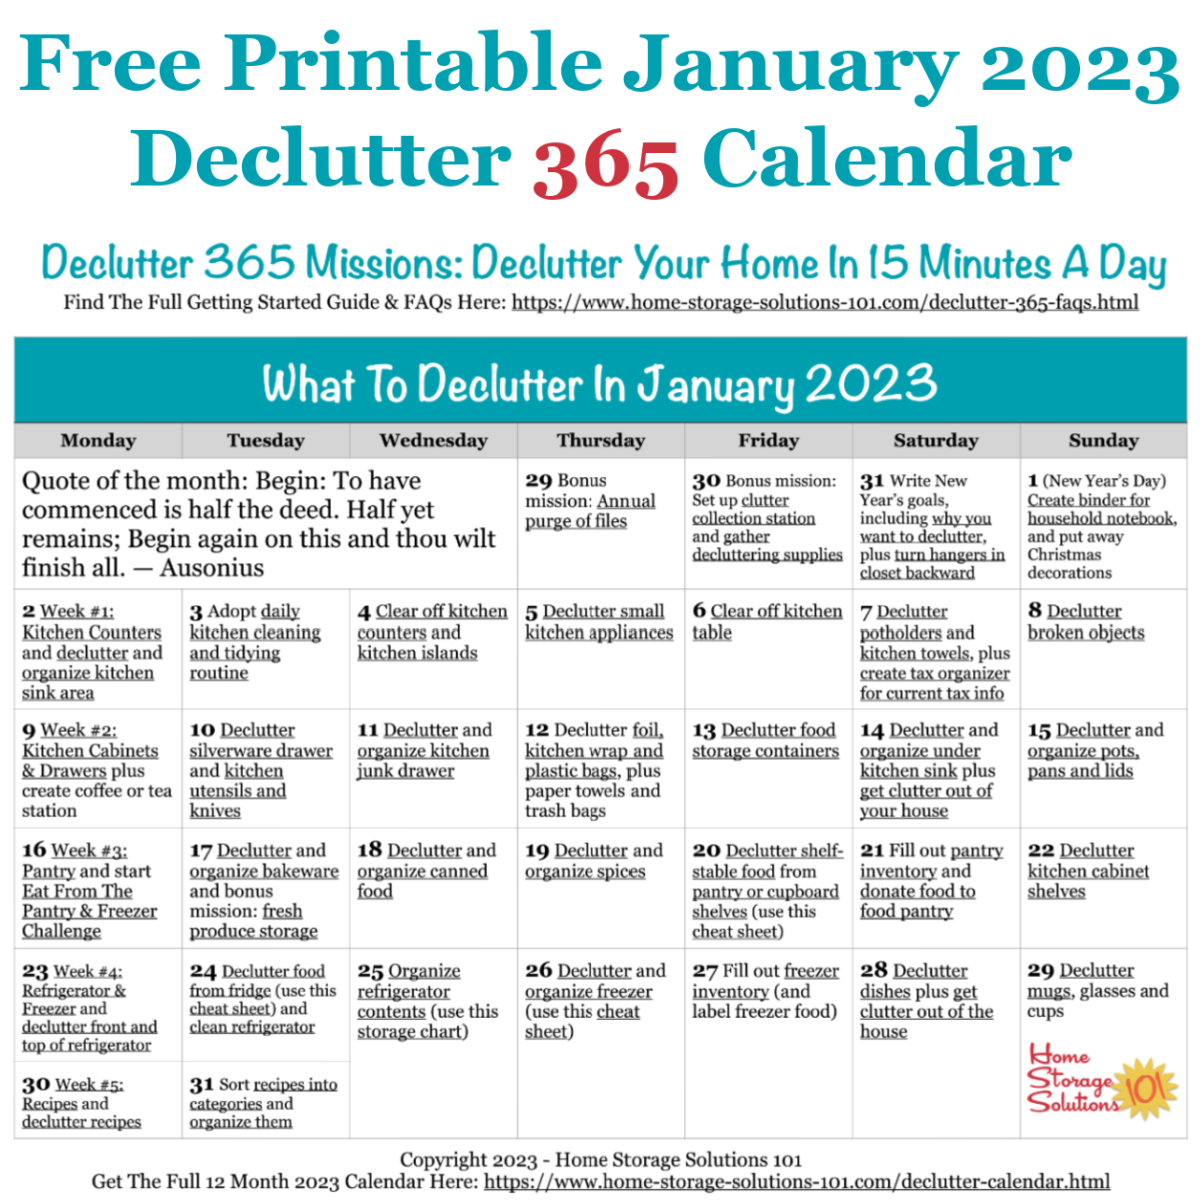 Free printable January 2023 #decluttering calendar with daily 15 minute missions. Follow the entire #Declutter365 plan provided by Home Storage Solutions 101 to #declutter your whole house in a year.